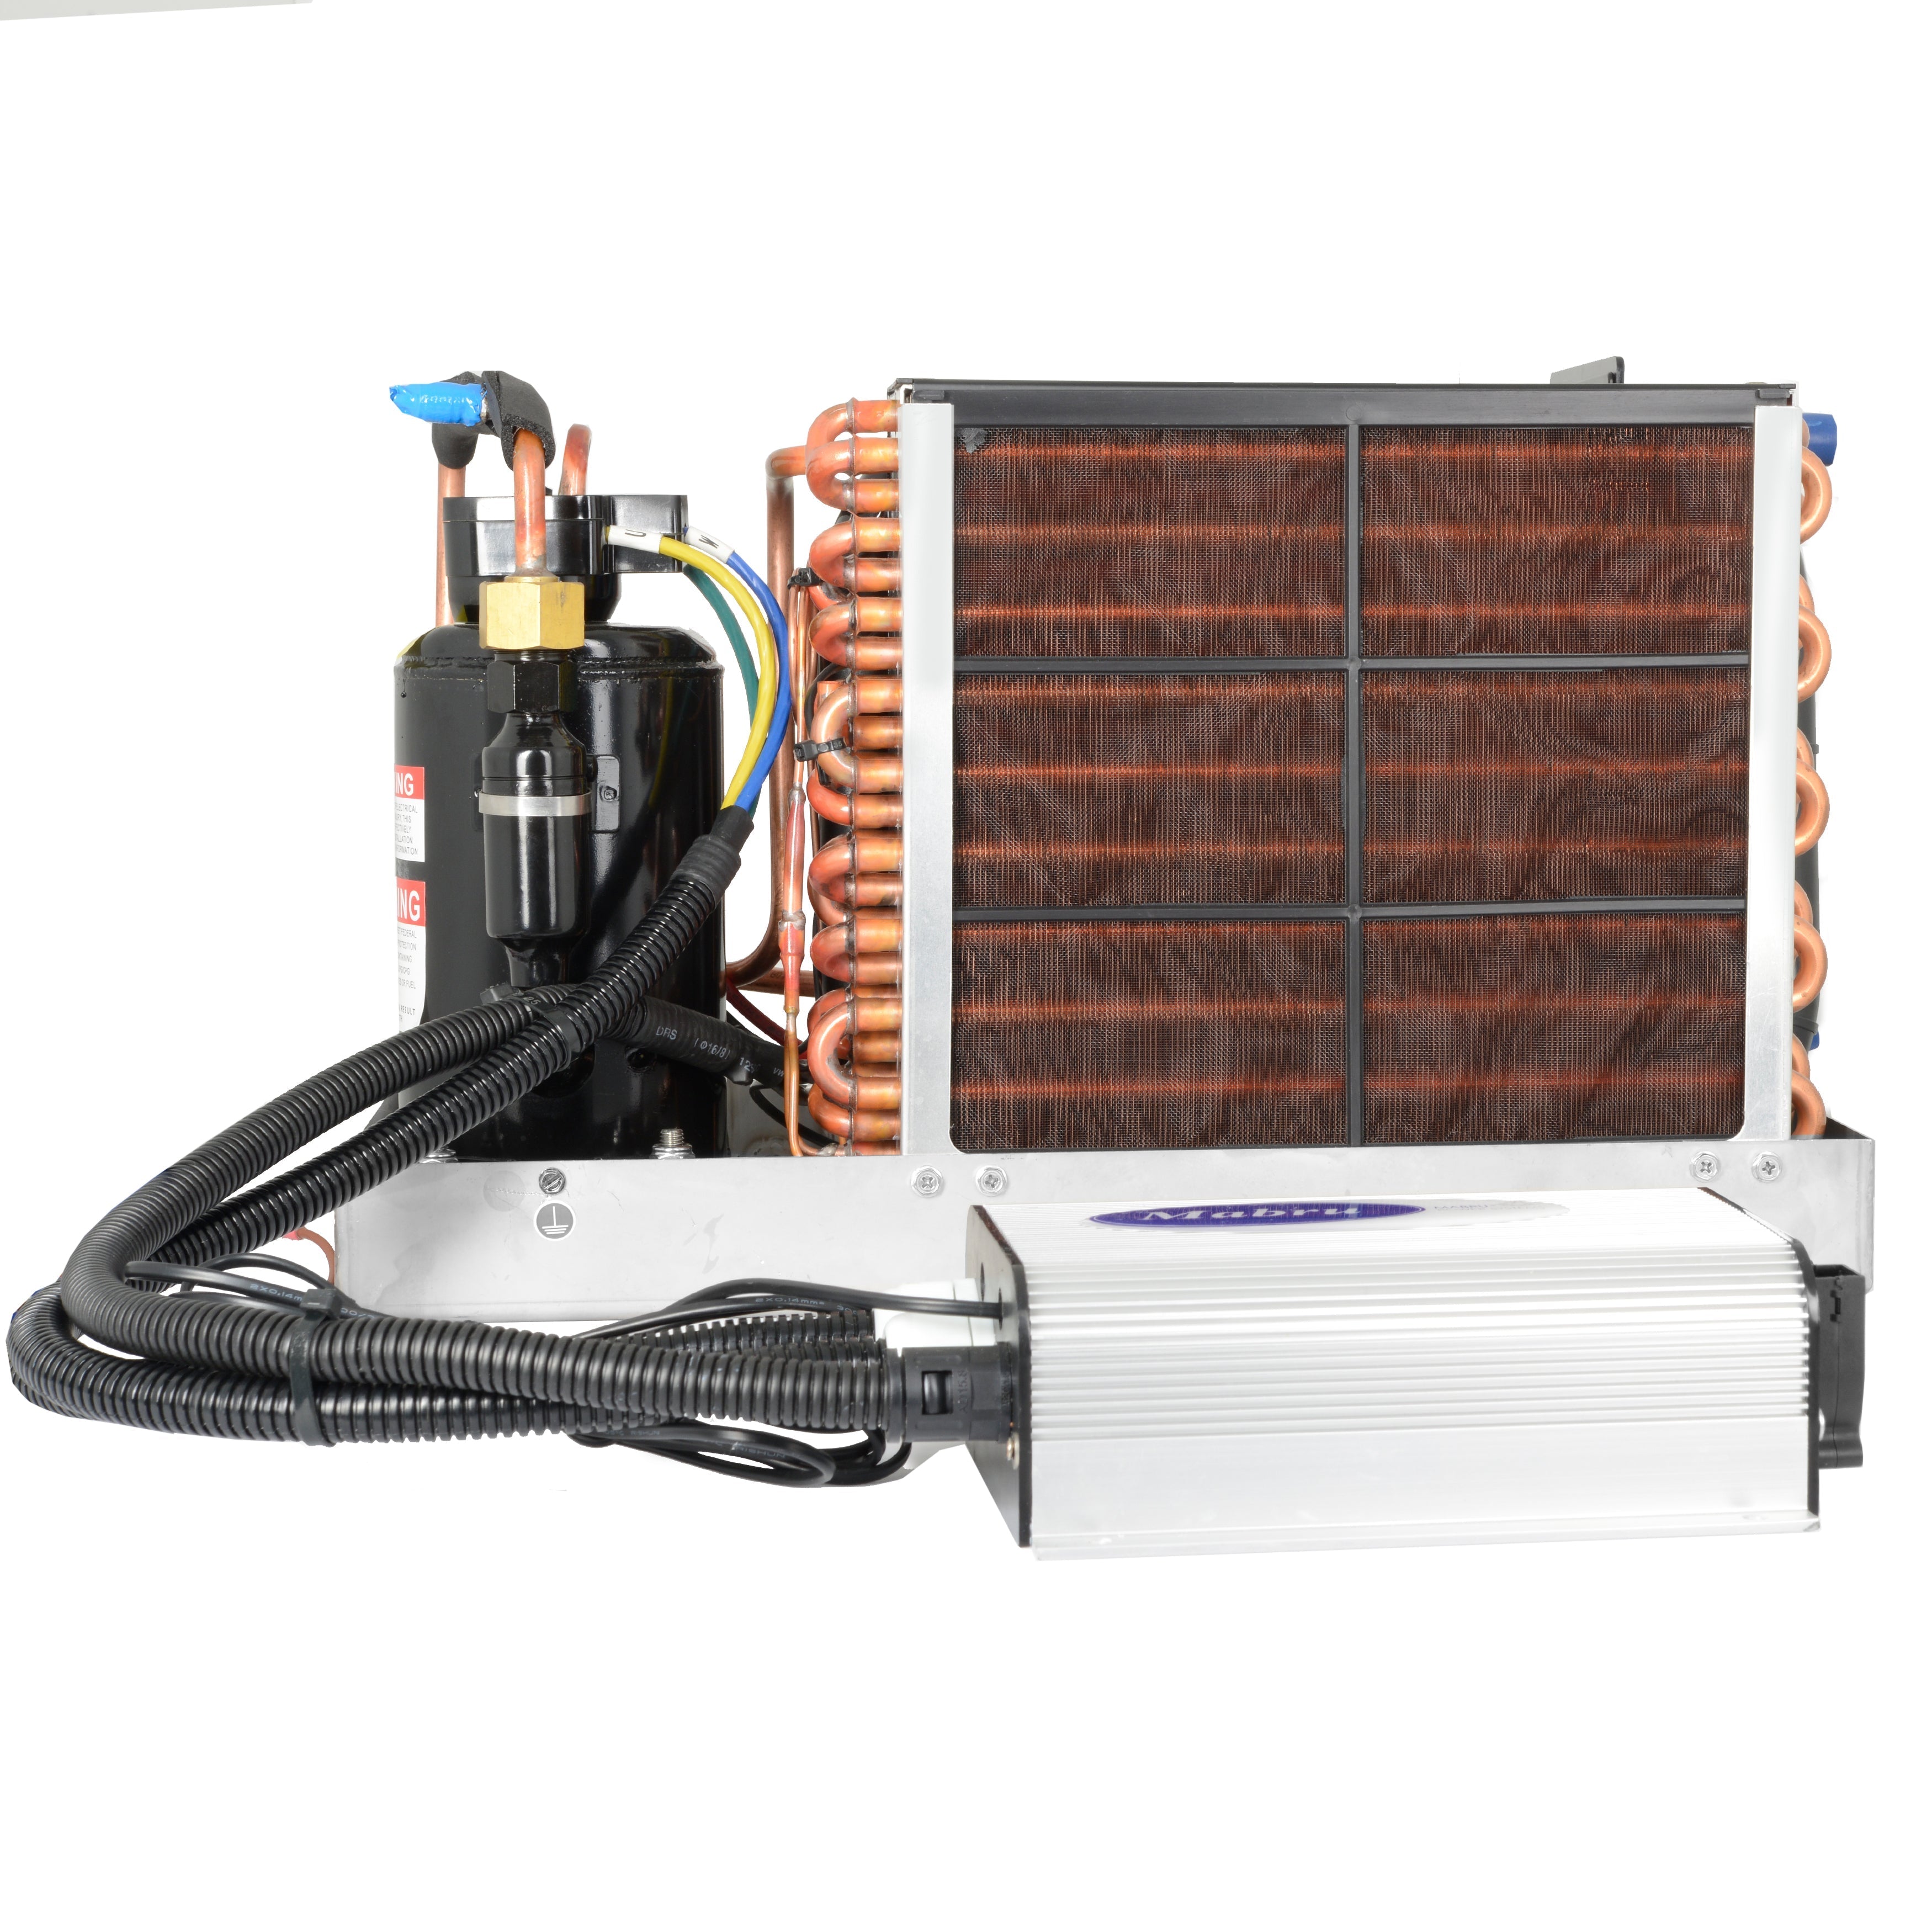 Mabru Power Systems (MPS) Marine Air Conditioning 12K Series / SC 12000 BTU Self Contained Unit - 12v DC